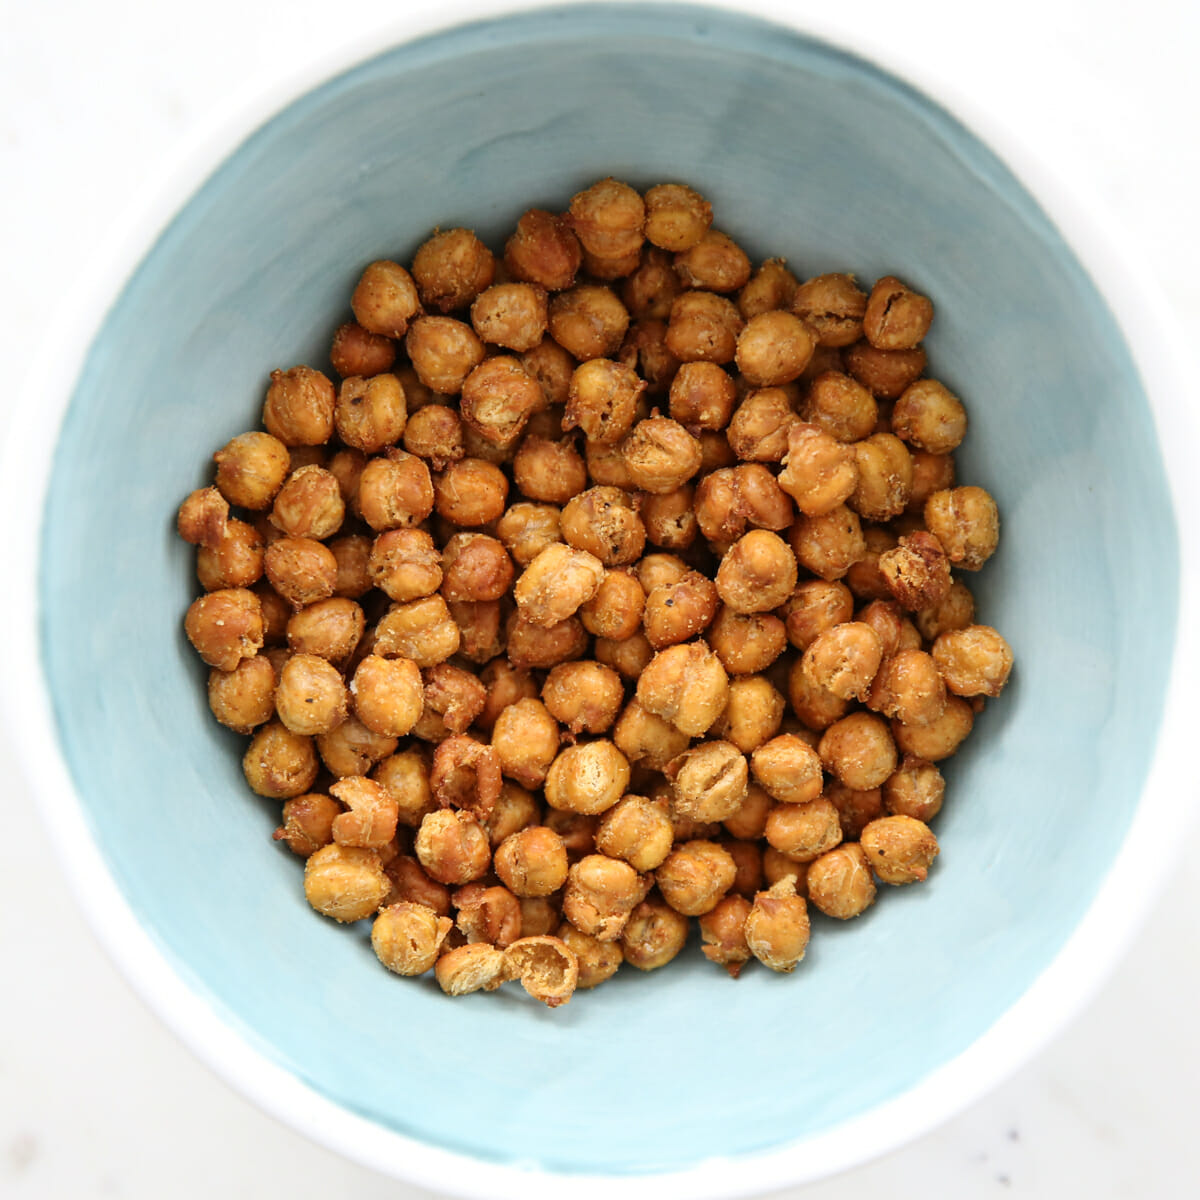 Air-fried chick peas in a light blue bowl